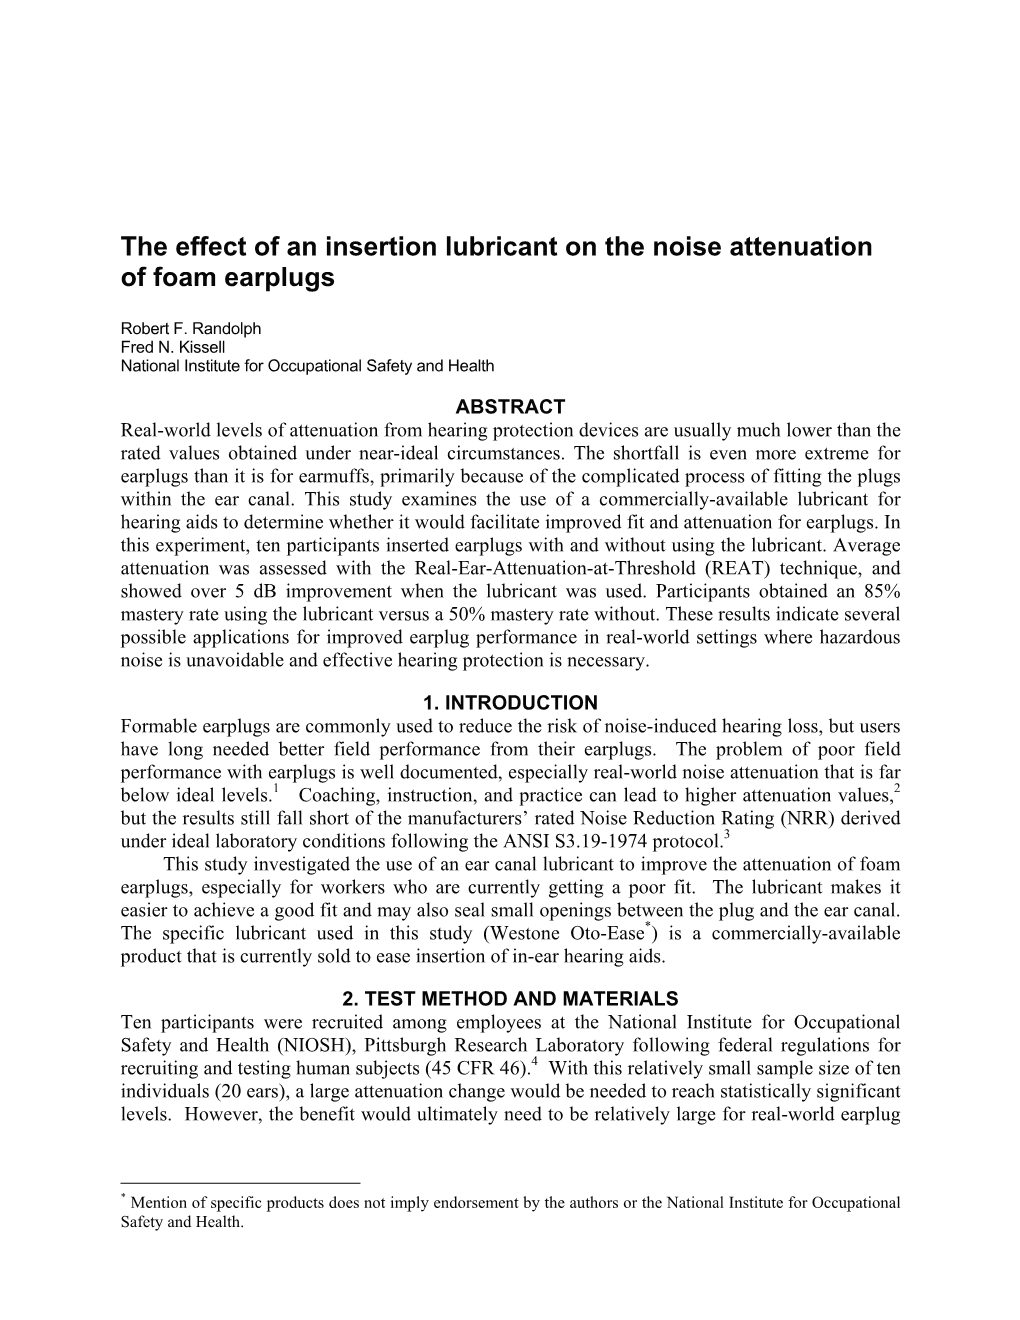 The Effect of an Insertion Lubricant on the Noise Attenuation of Foam Earplugs